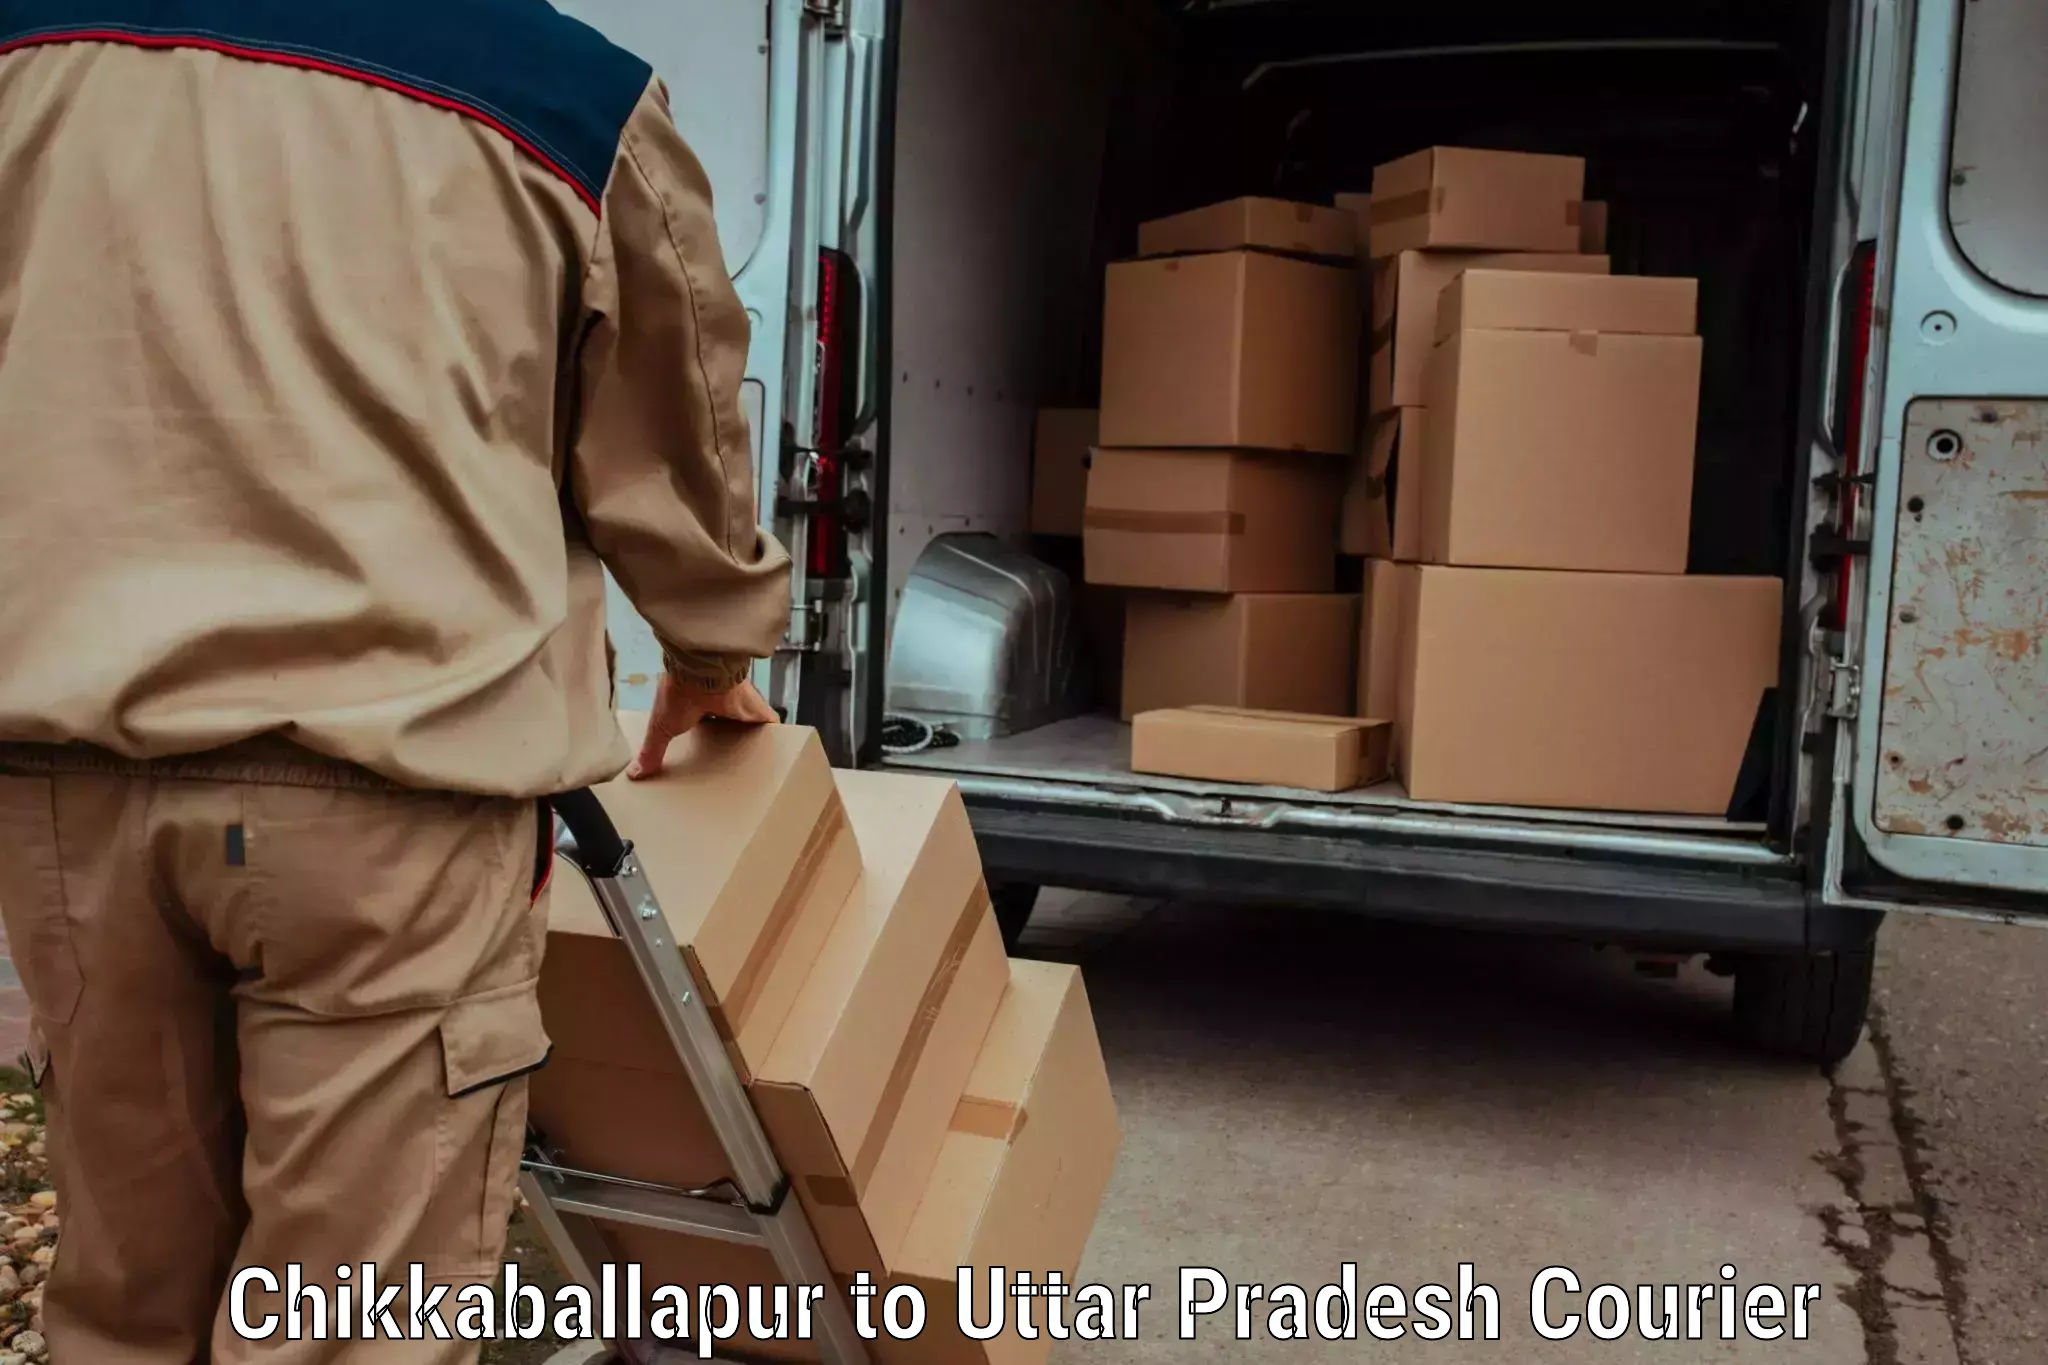 Reliable delivery network Chikkaballapur to Salempur